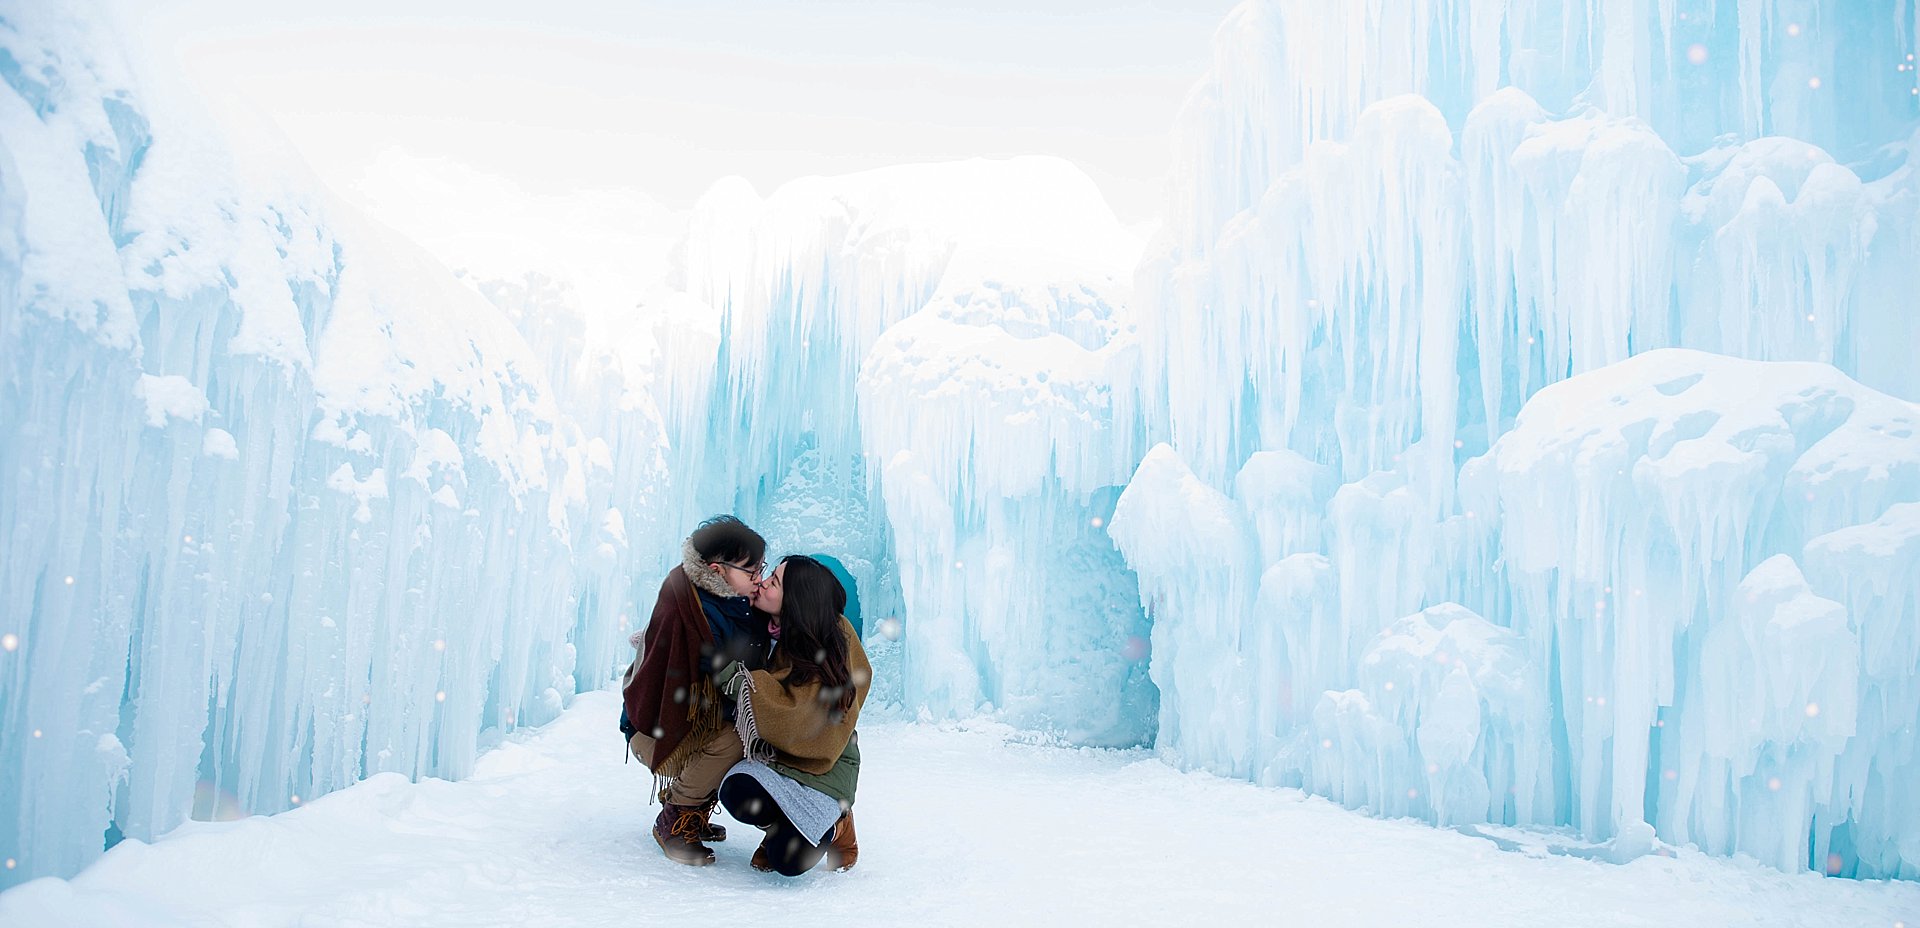 VJ-Ice-castles-engagement-photography_0016